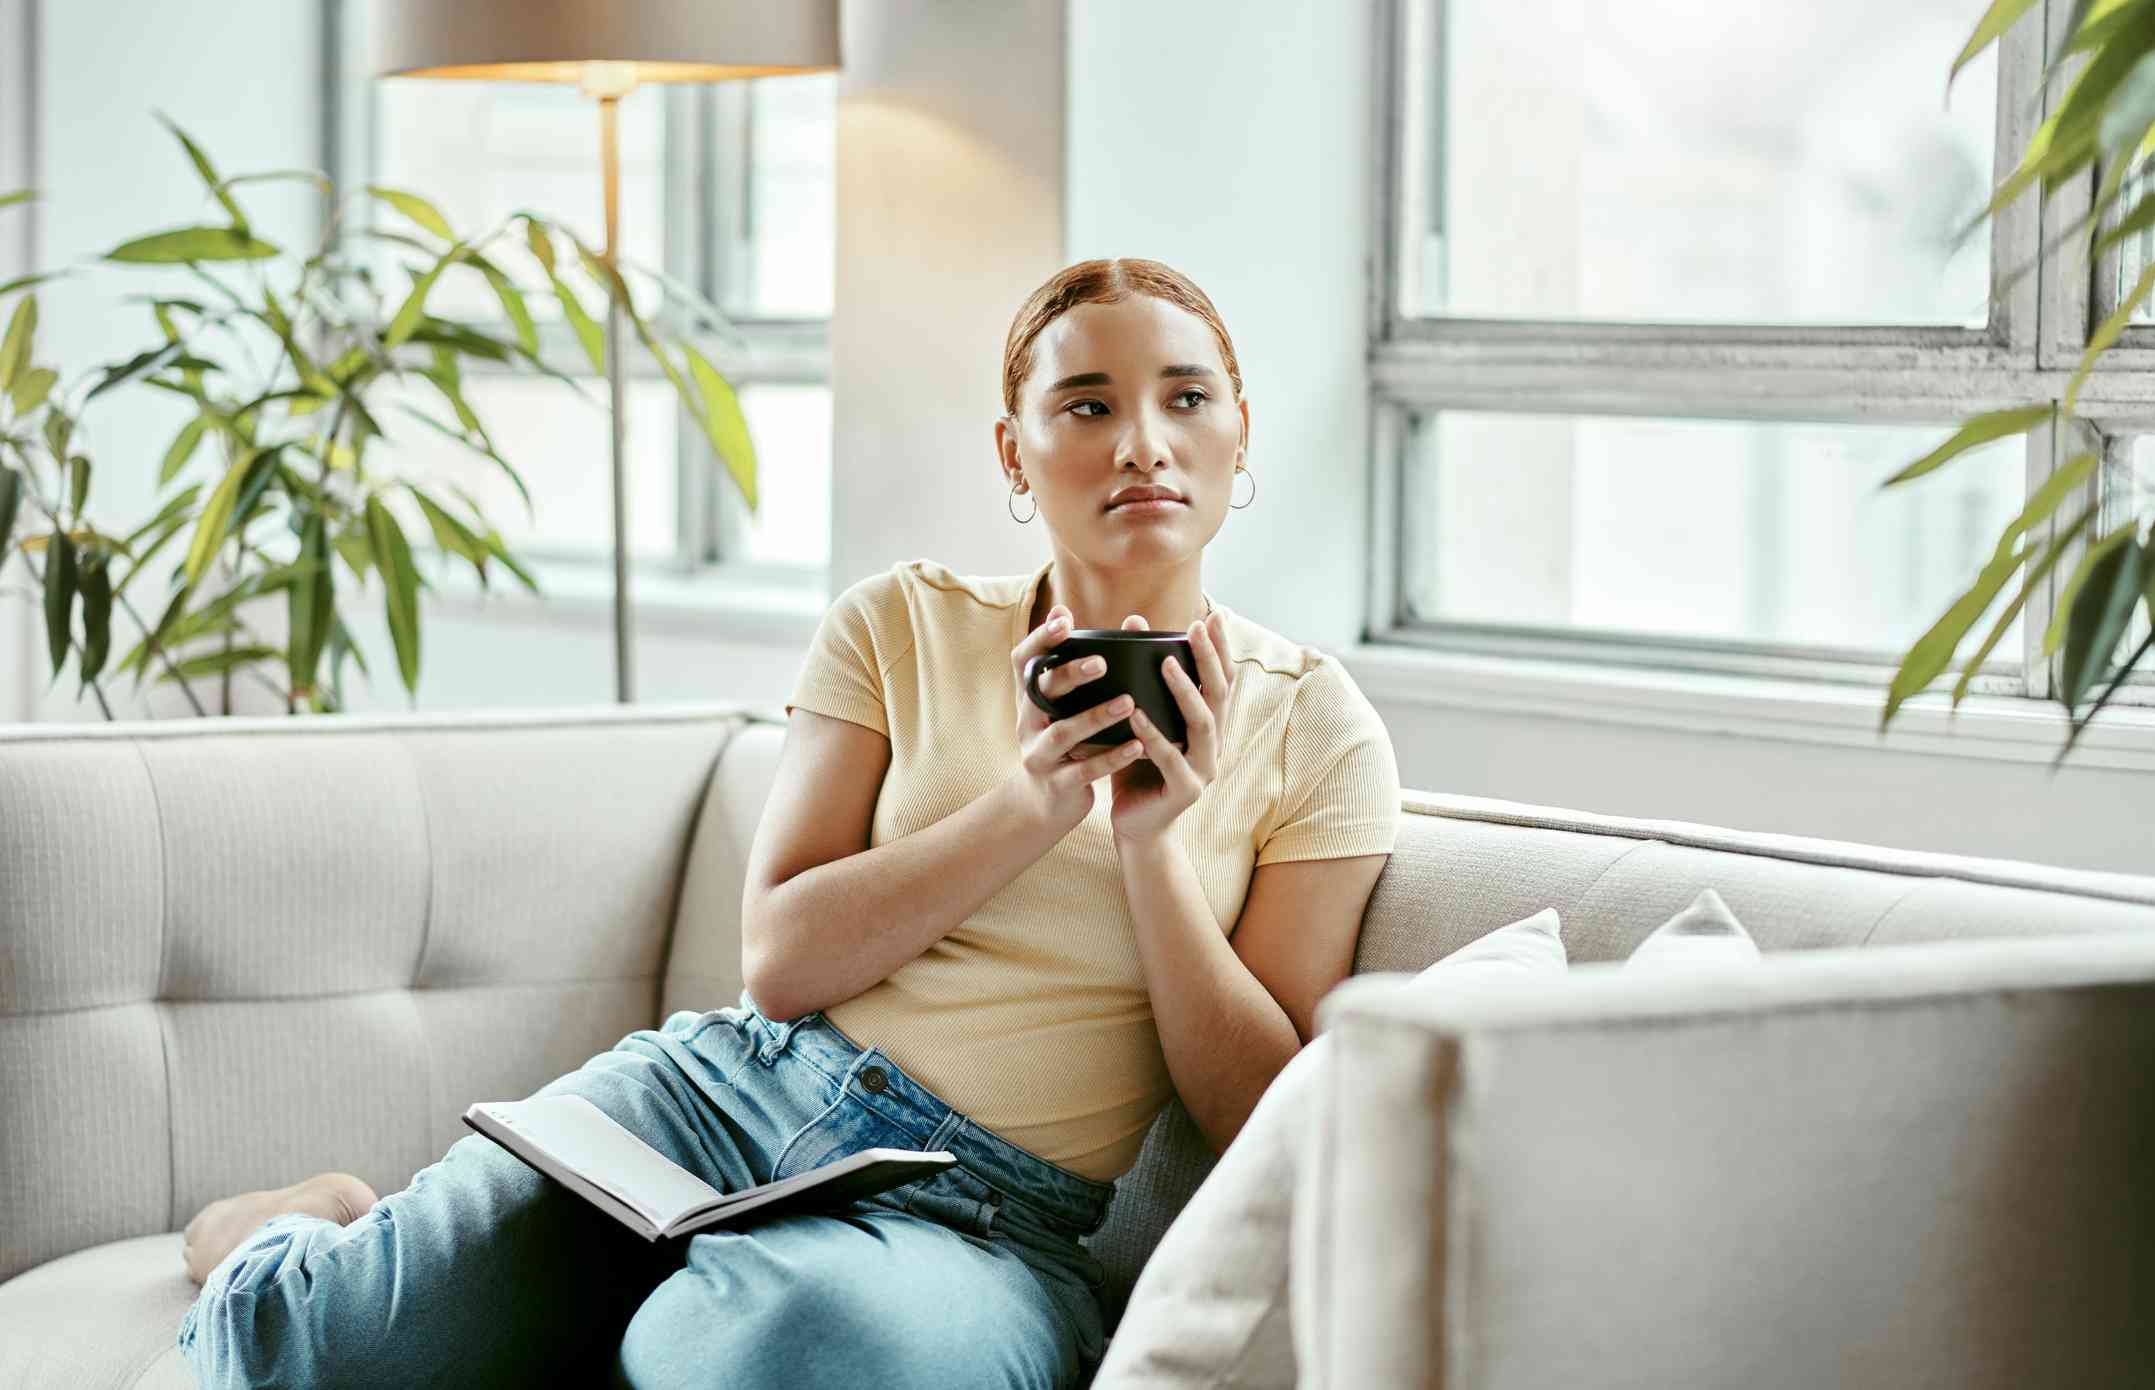 A woman in a yellow shirt sits on the couch with a coffee mug in her hands and a book open in her lap as she gazes off.